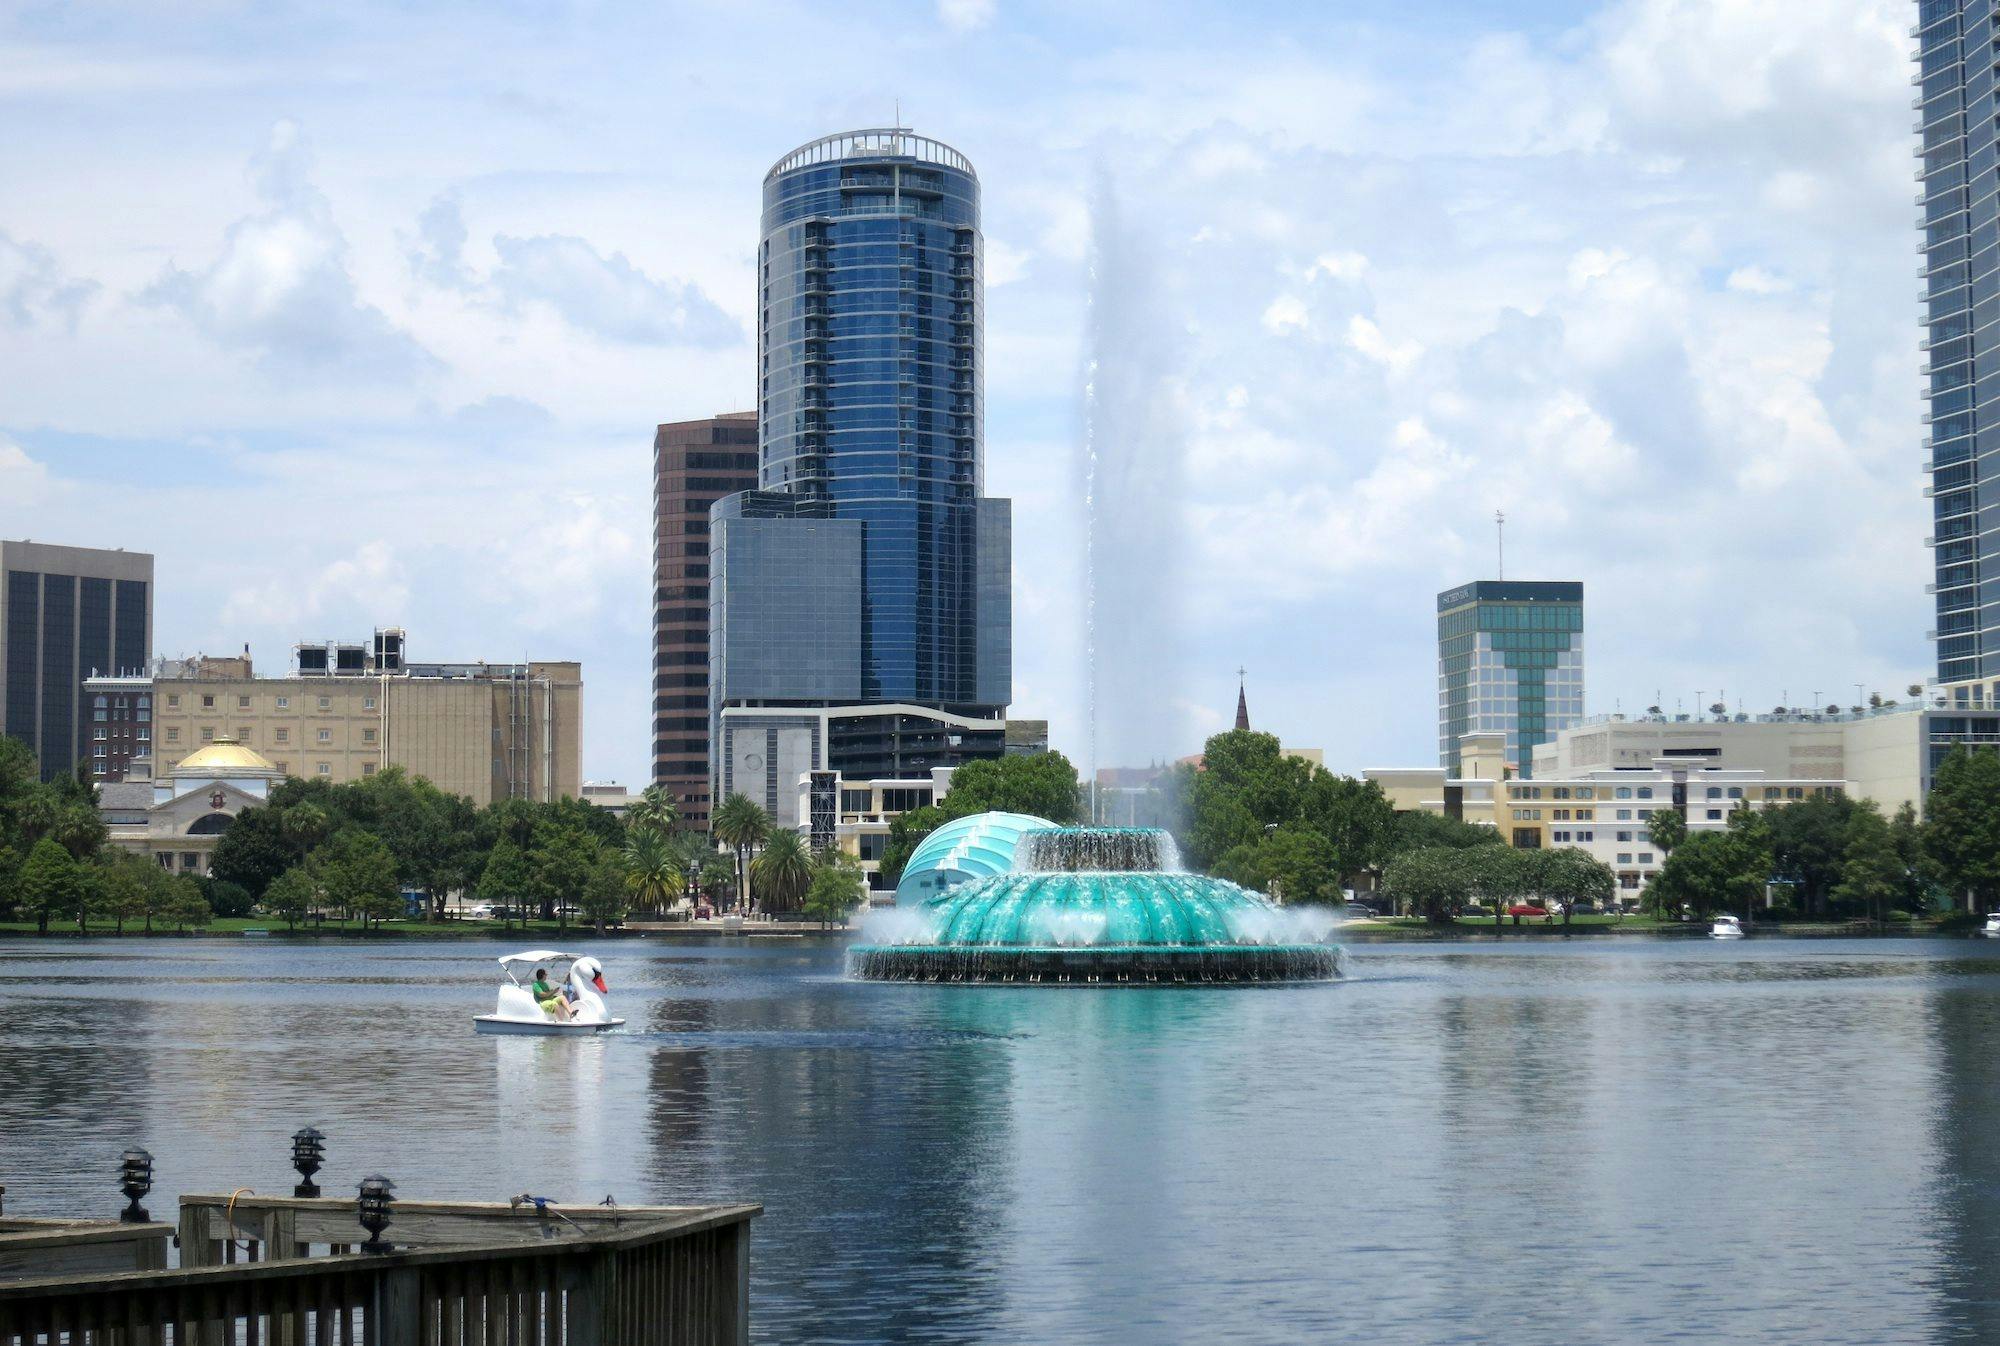 Free Things to Do in Orlando: Lake Eola Park